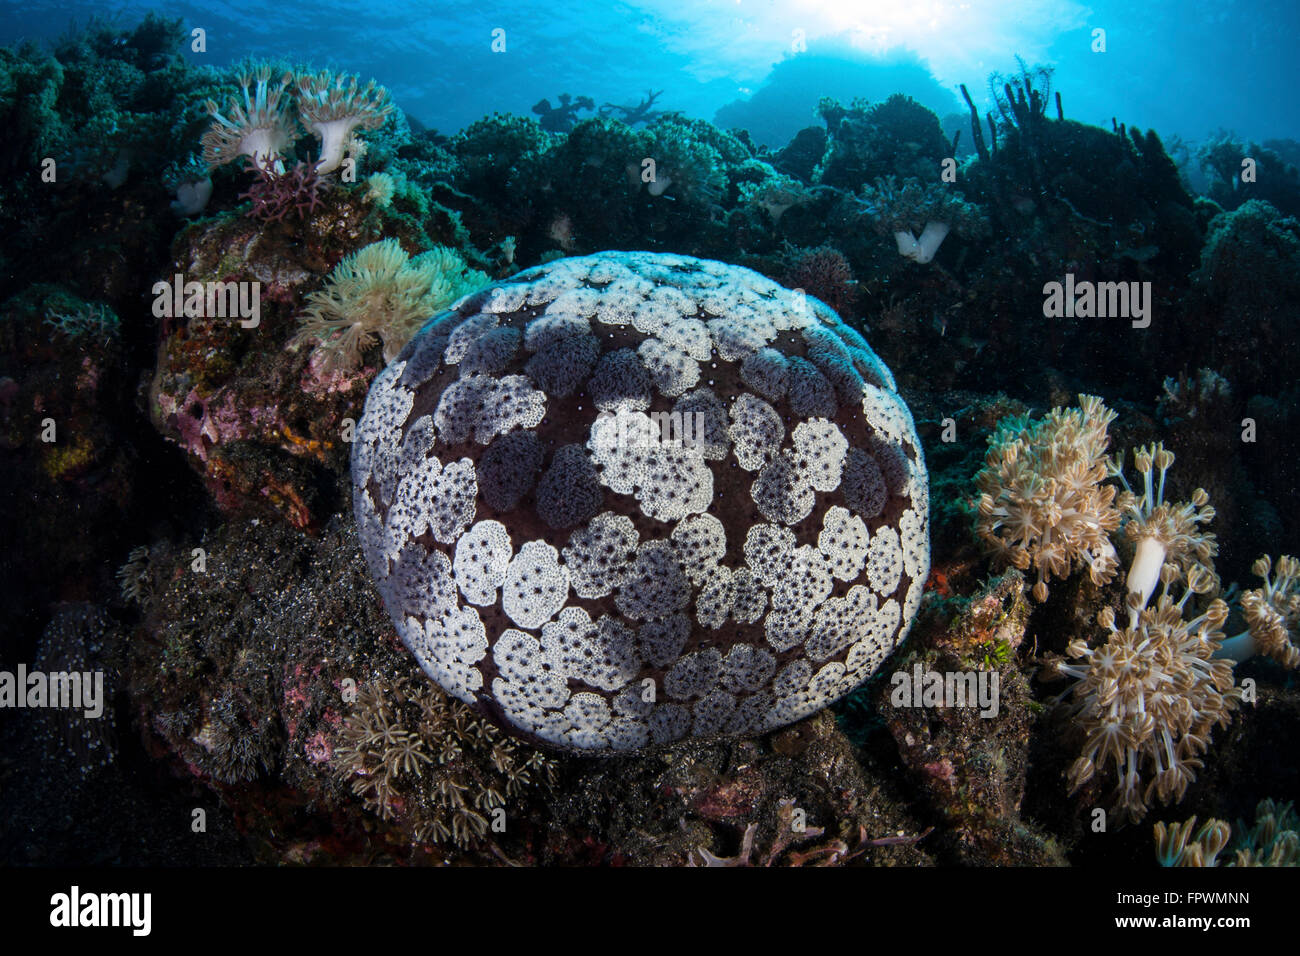 A pin cushion starfish (Culcita sp.) clings to a coral reef in Komodo National Park, Indonesia. This tropical area in the wester Stock Photo